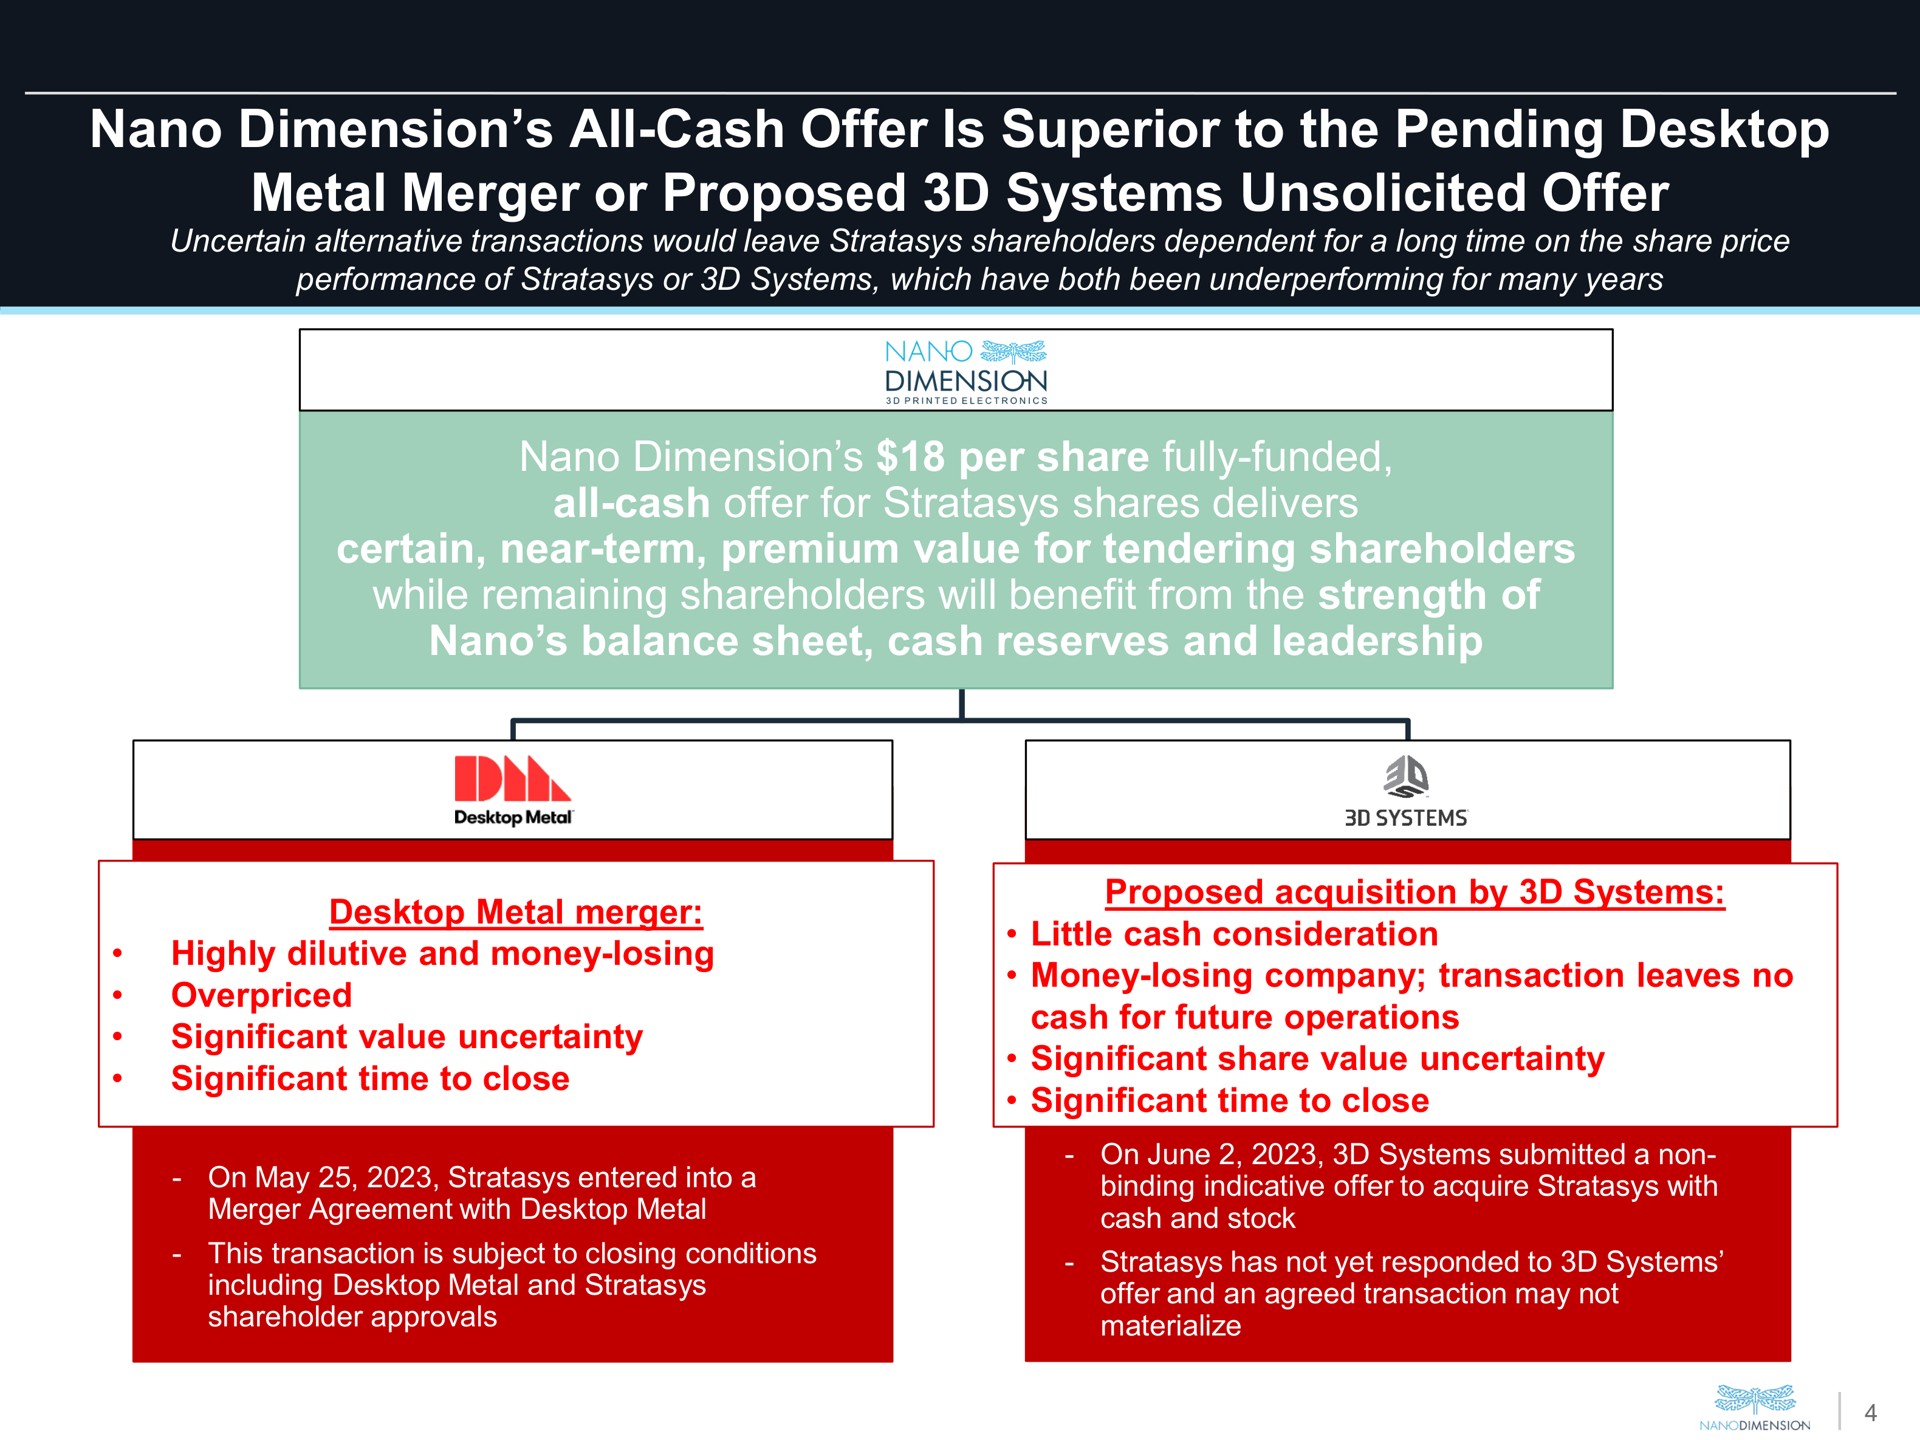 dimension all cash offer is superior to the pending metal merger or proposed systems unsolicited offer dimension per share fully funded all cash offer for shares delivers certain near term premium value for tendering shareholders while remaining shareholders will benefit from the strength of balance sheet cash reserves and leadership an | Nano Dimension